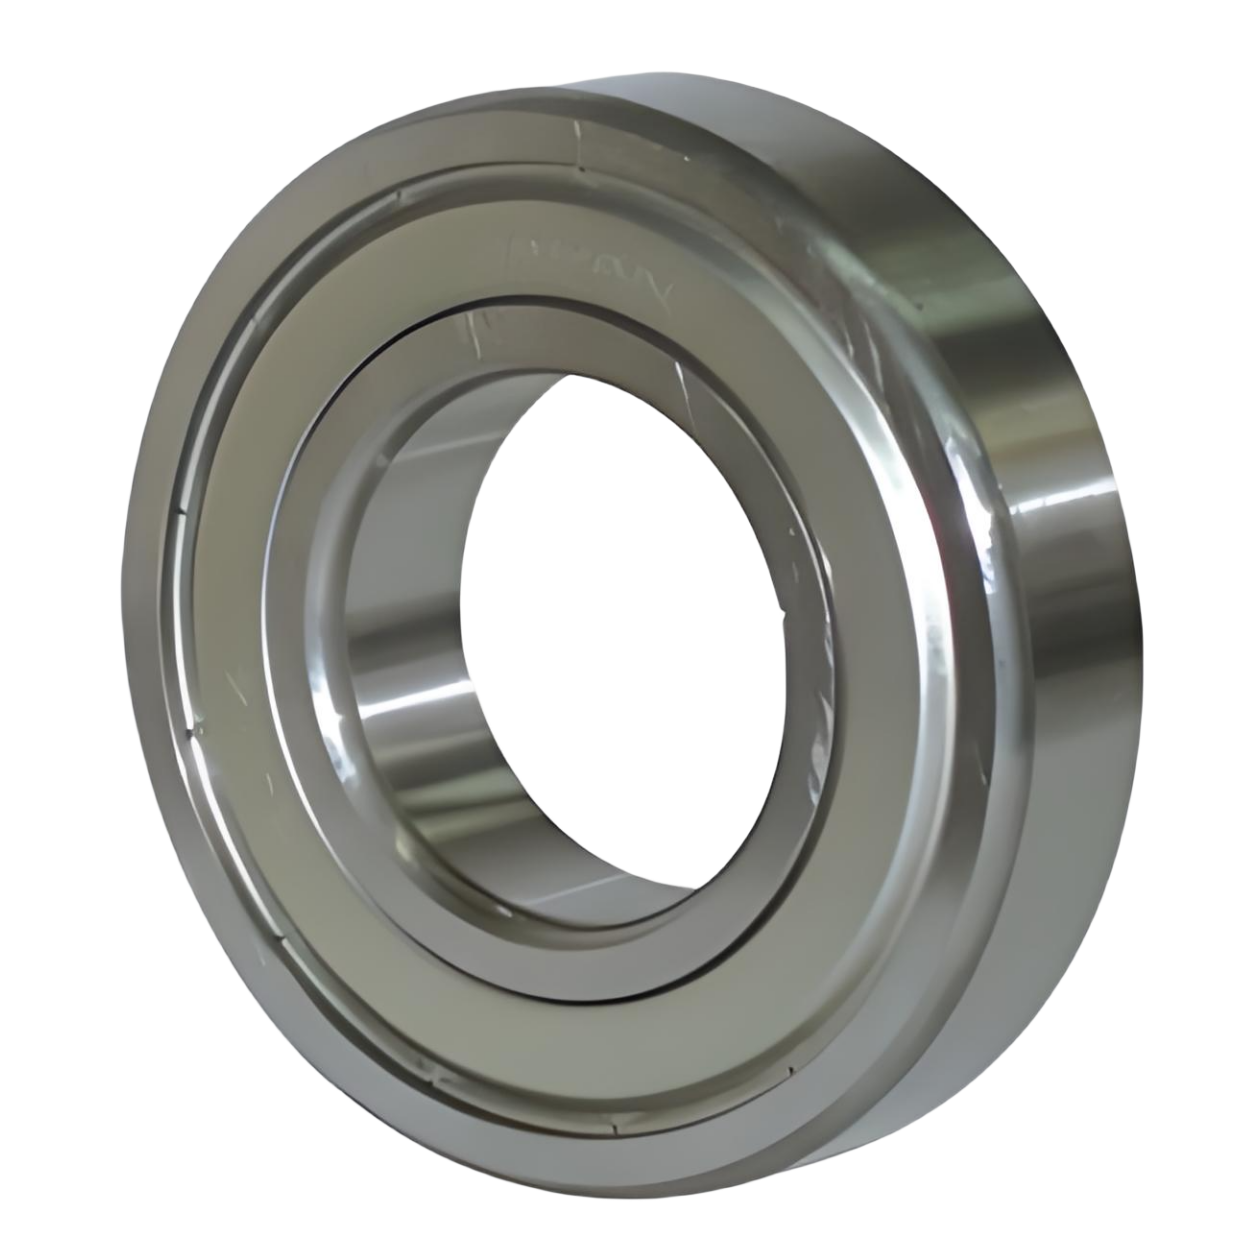 Inch Size AISI440C Steel Ball Bearings